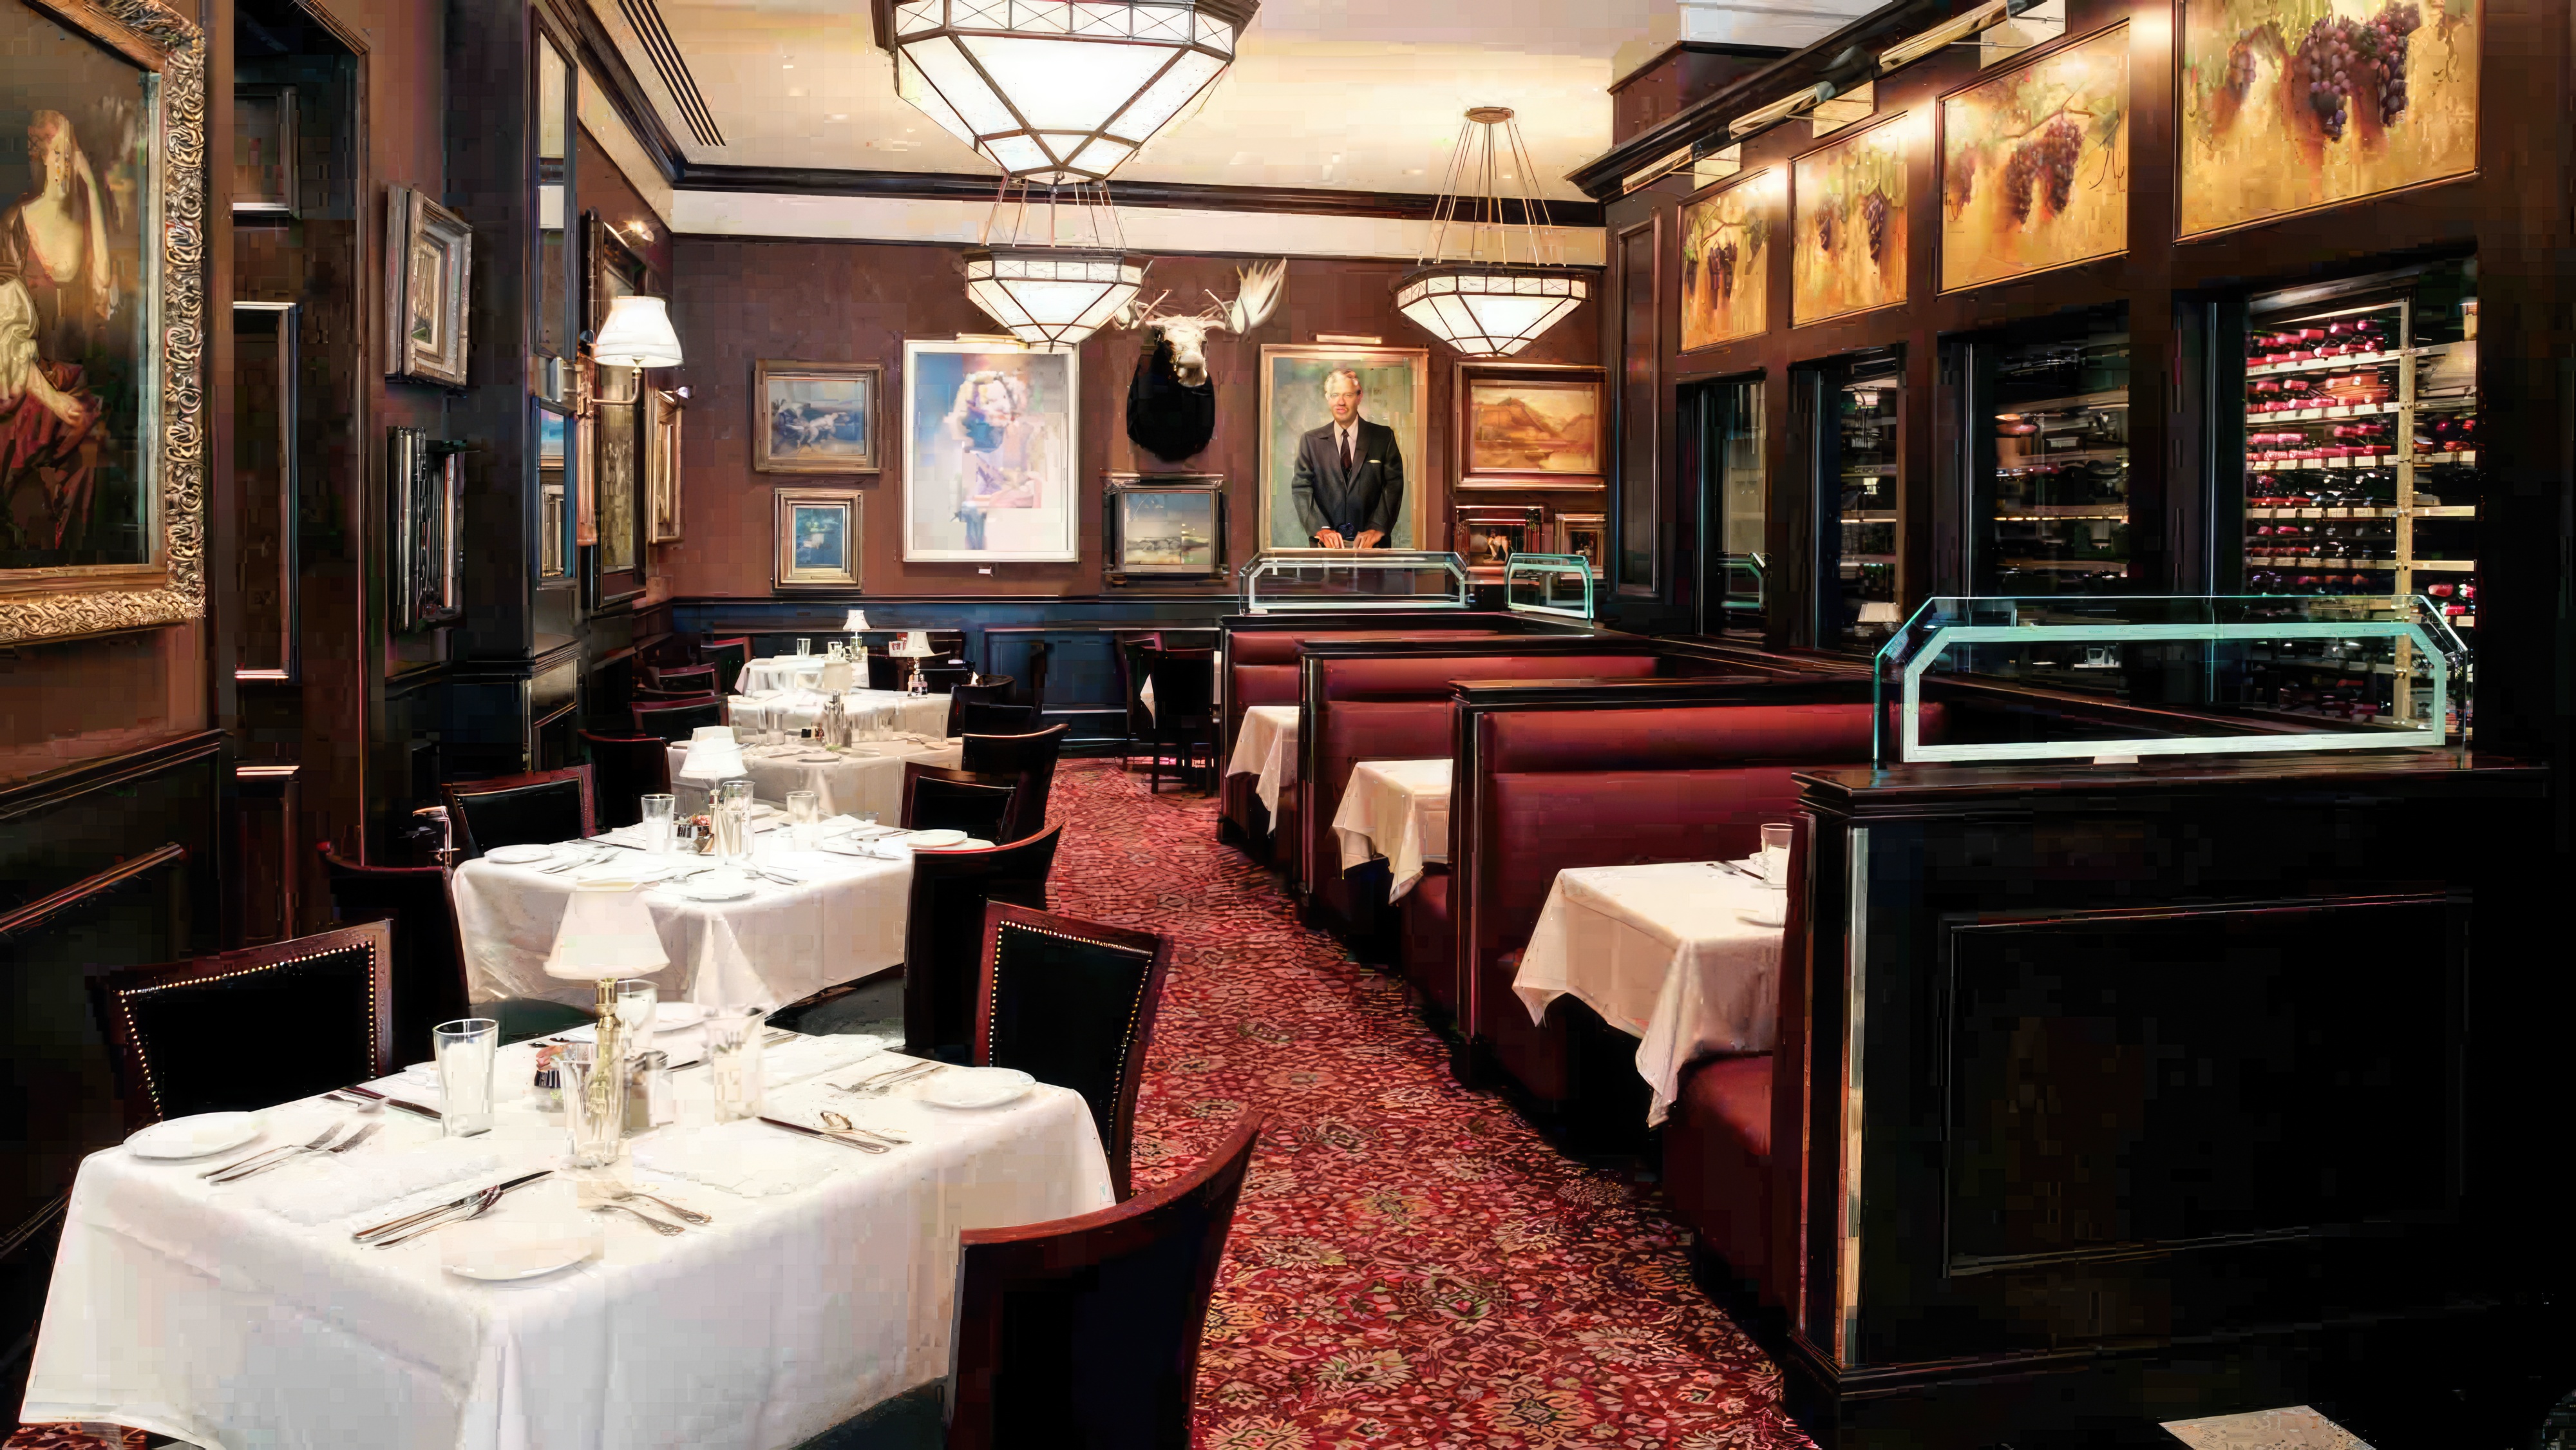 The Capital Grille Indianapolis interior